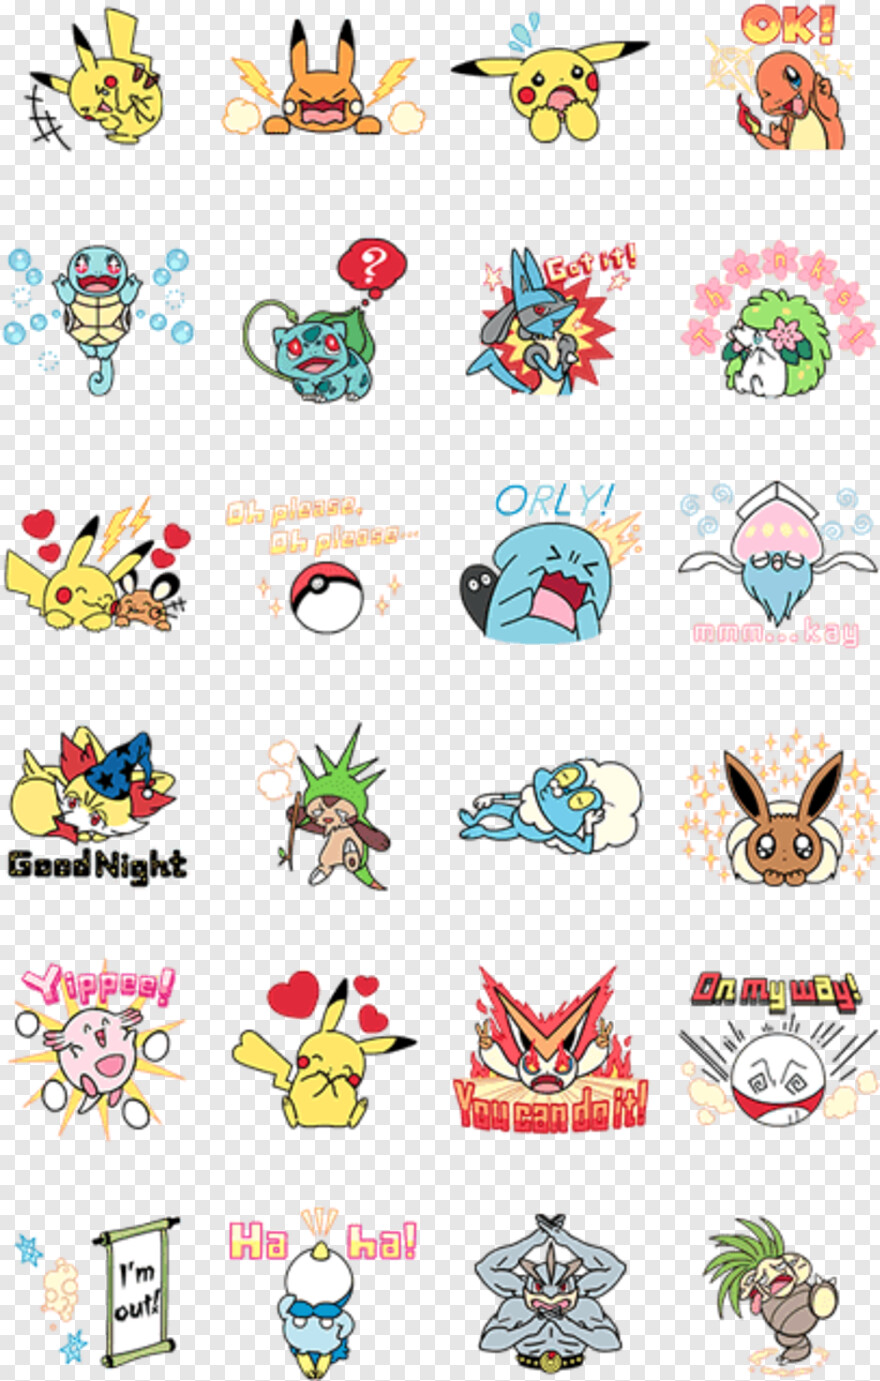 Tumblr Stickers, Hike Stickers, Animated Gif, Snapchat Stickers, Picsart  Stickers, Sticker #513613 - Free Icon Library